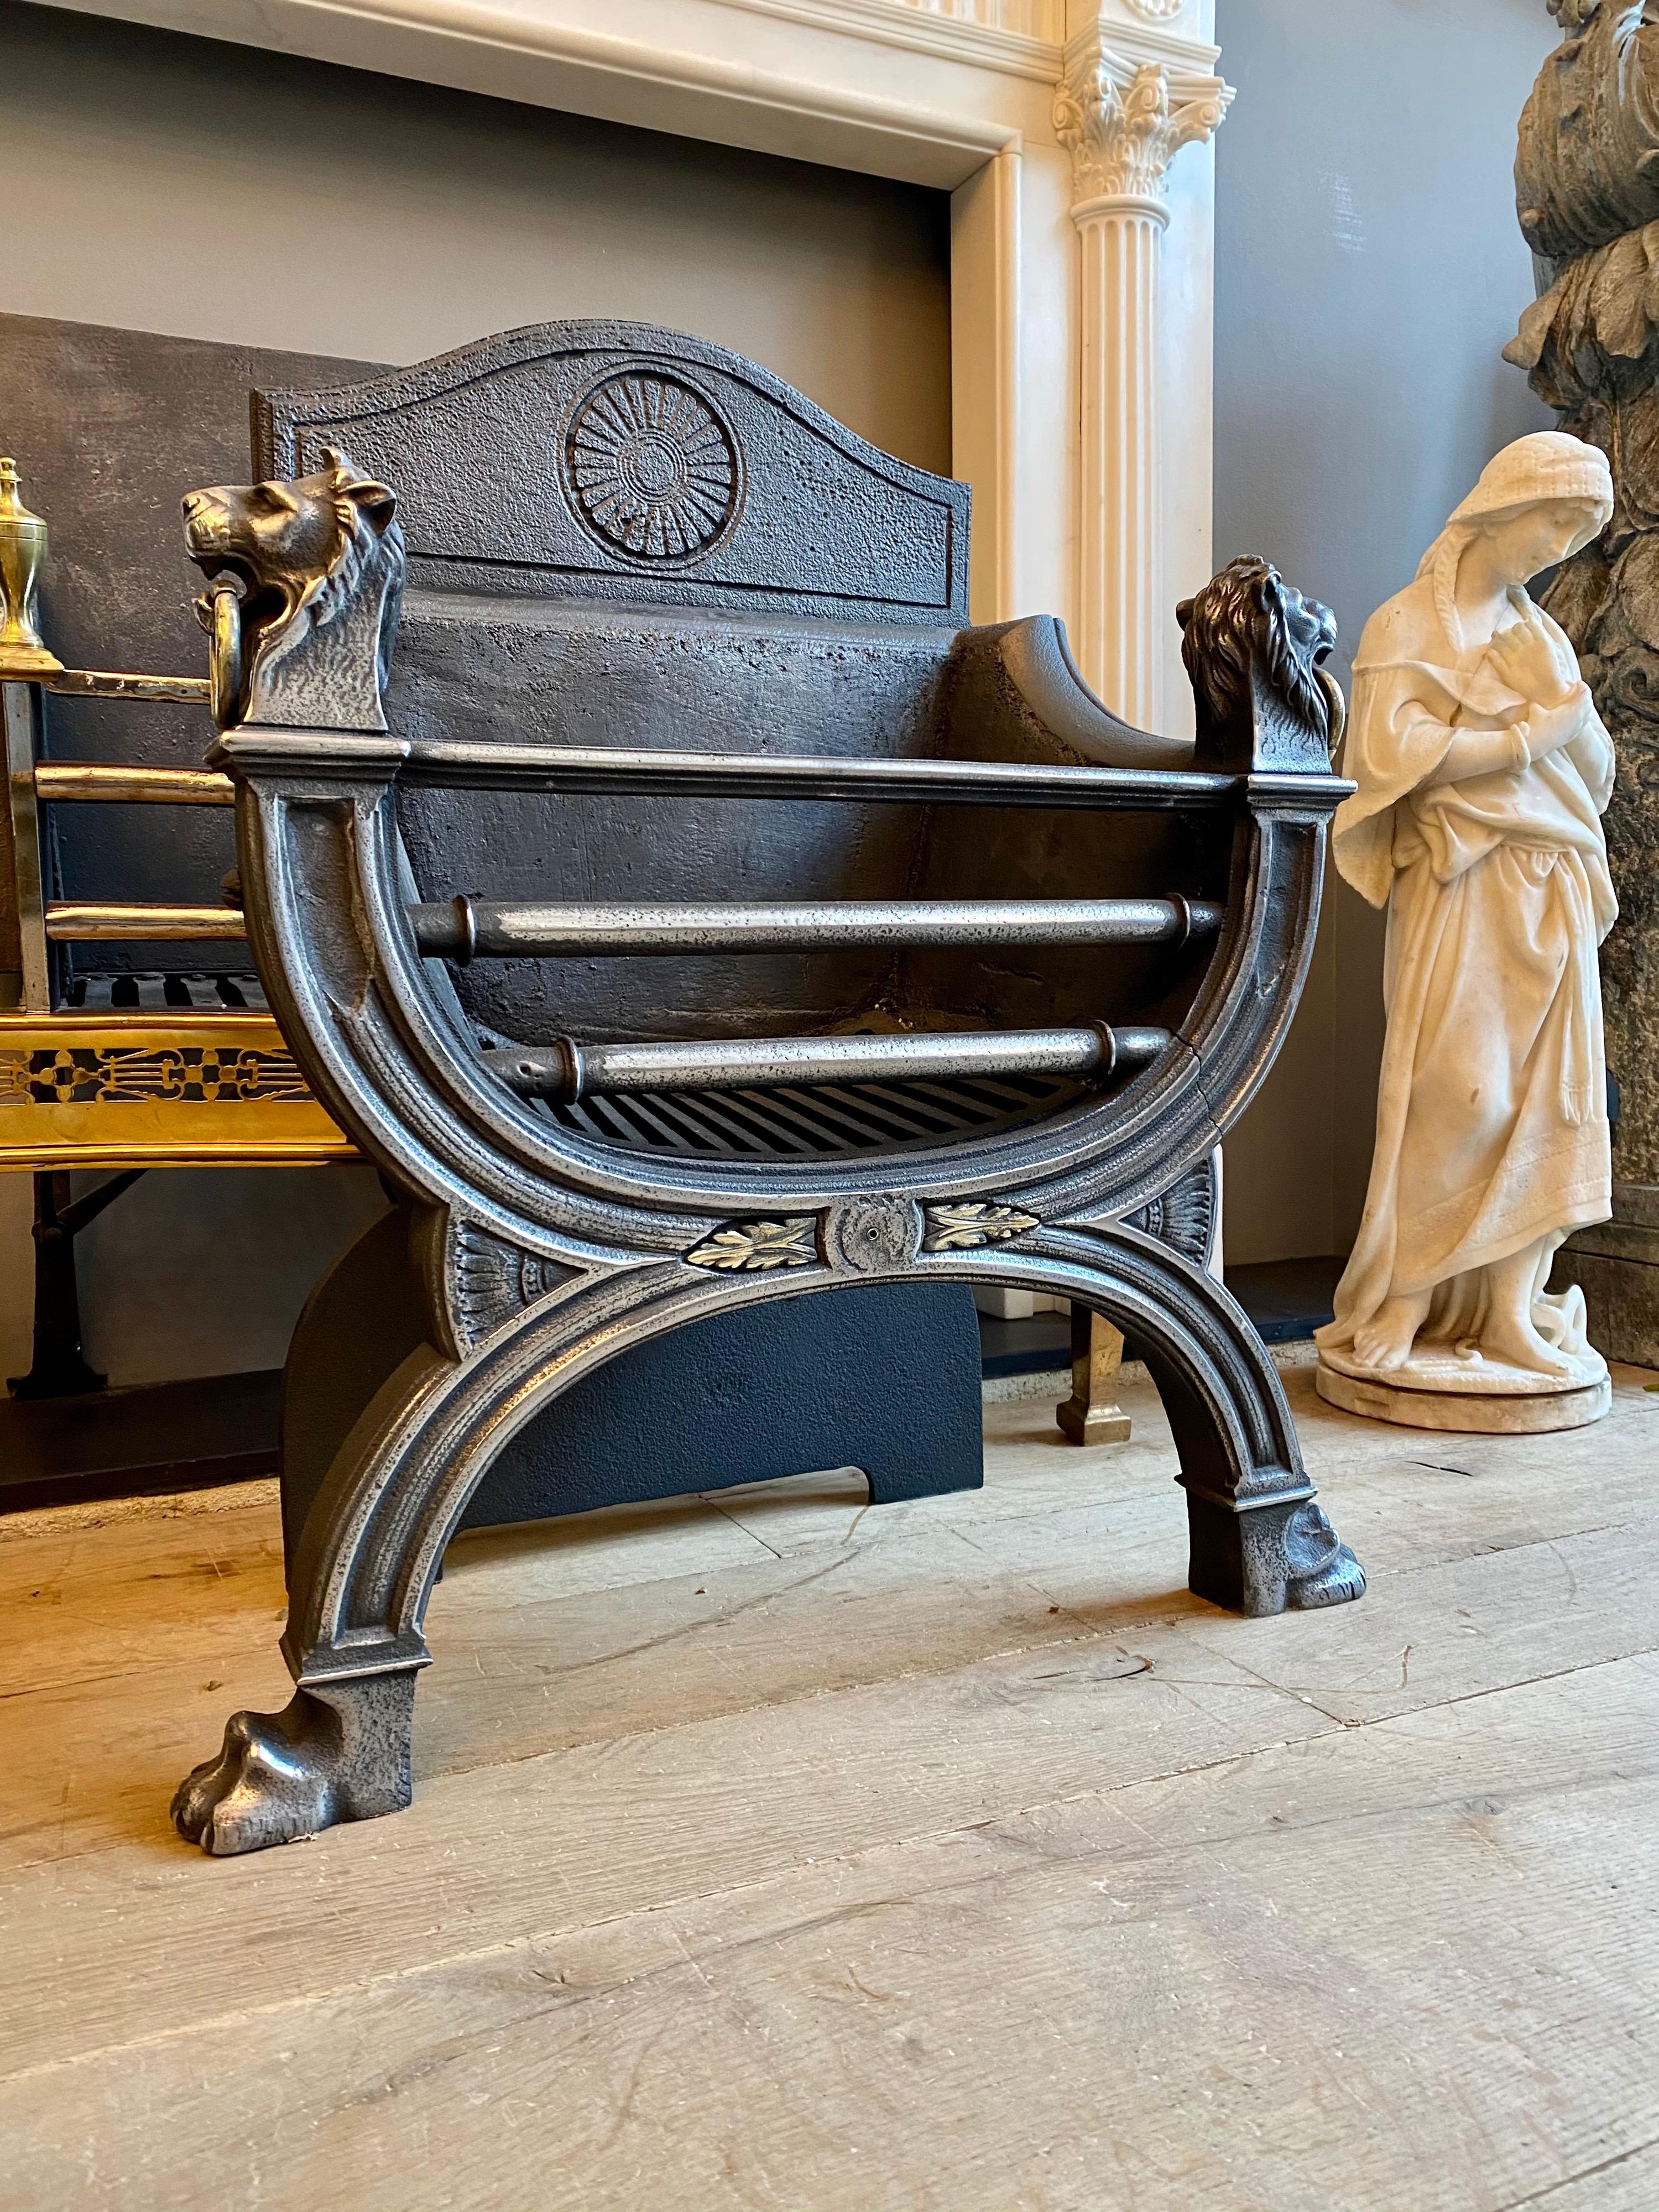 An elegant and good quality English 19th century regency style fire grate in polished cast iron. The lion heads finials with brass rings in the mouths surmount a curved reeded front which is supported with lions paw feet. The shaped fire back with